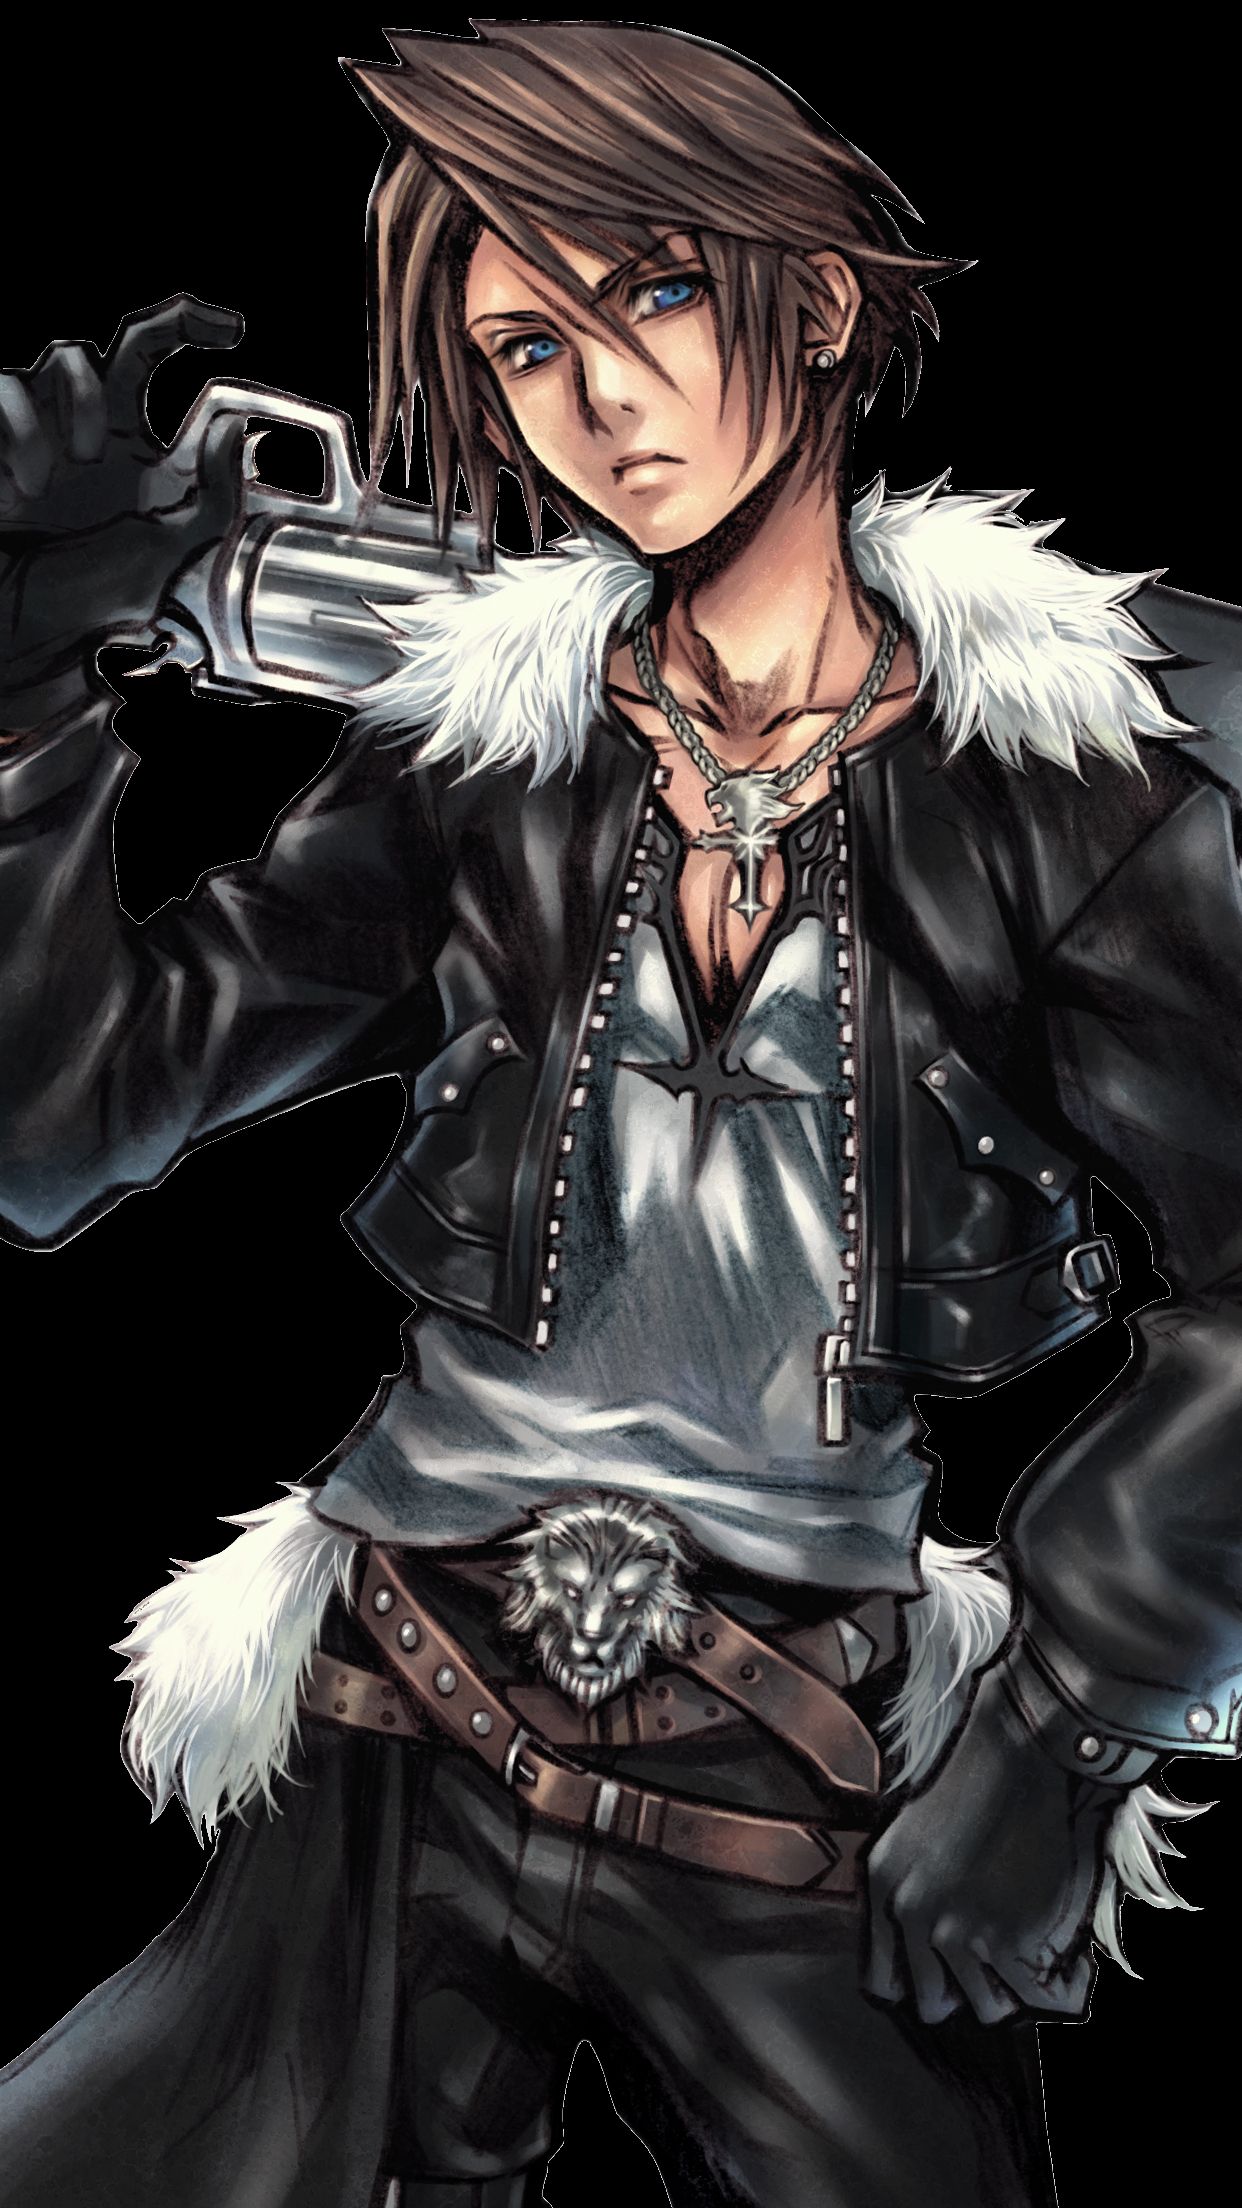 Final Fantasy VIII Squall Wallpaper for iPhone X, 6